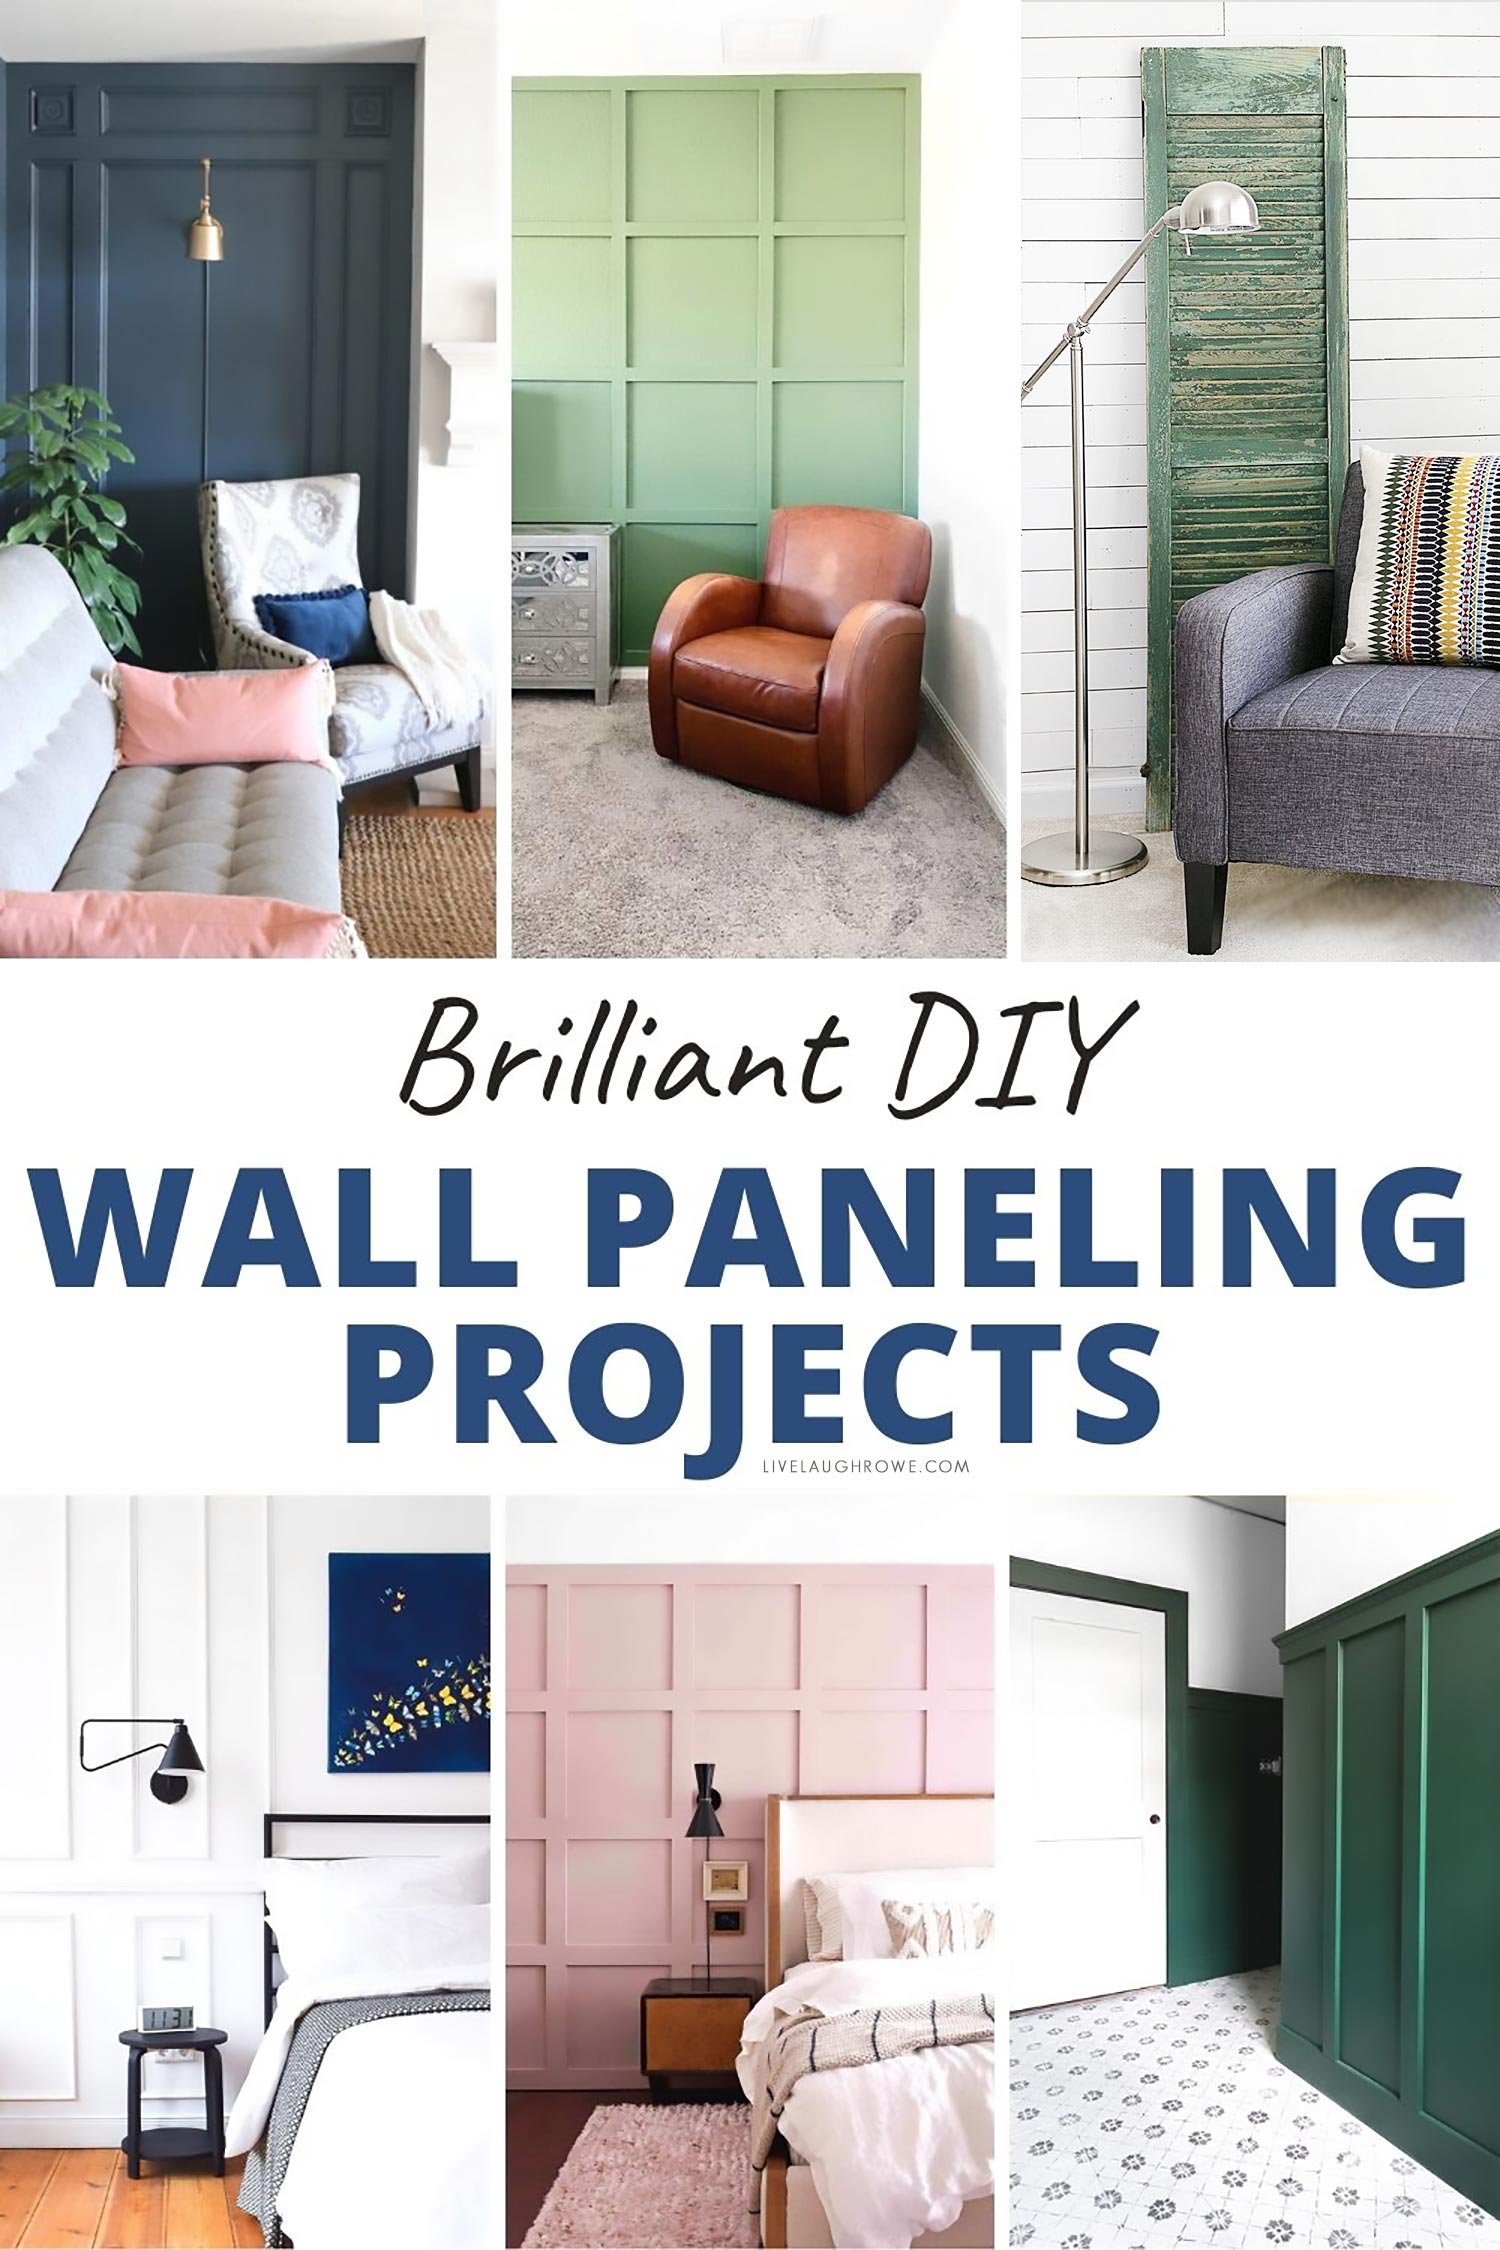 DIY Wall Paneling Ideas in a Collage